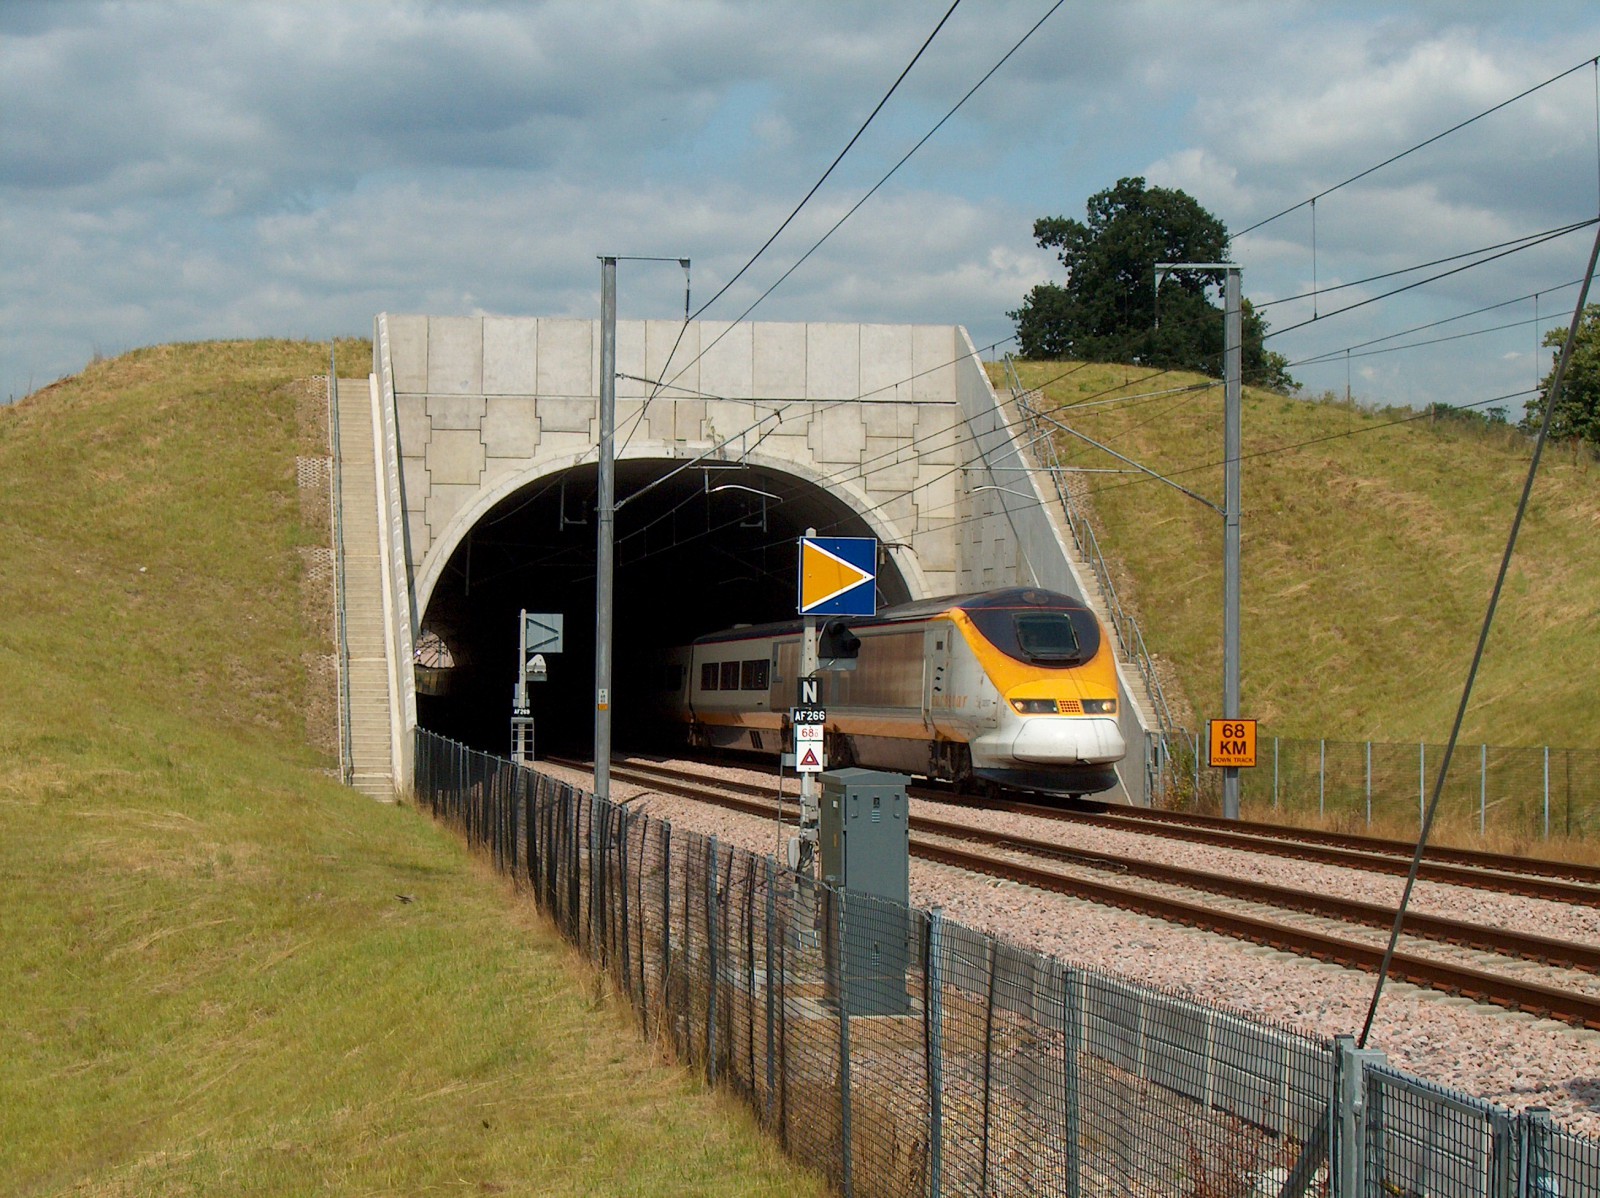 Channel Tunnel Rail link - Contract 420 - Eyhorne Tunnel